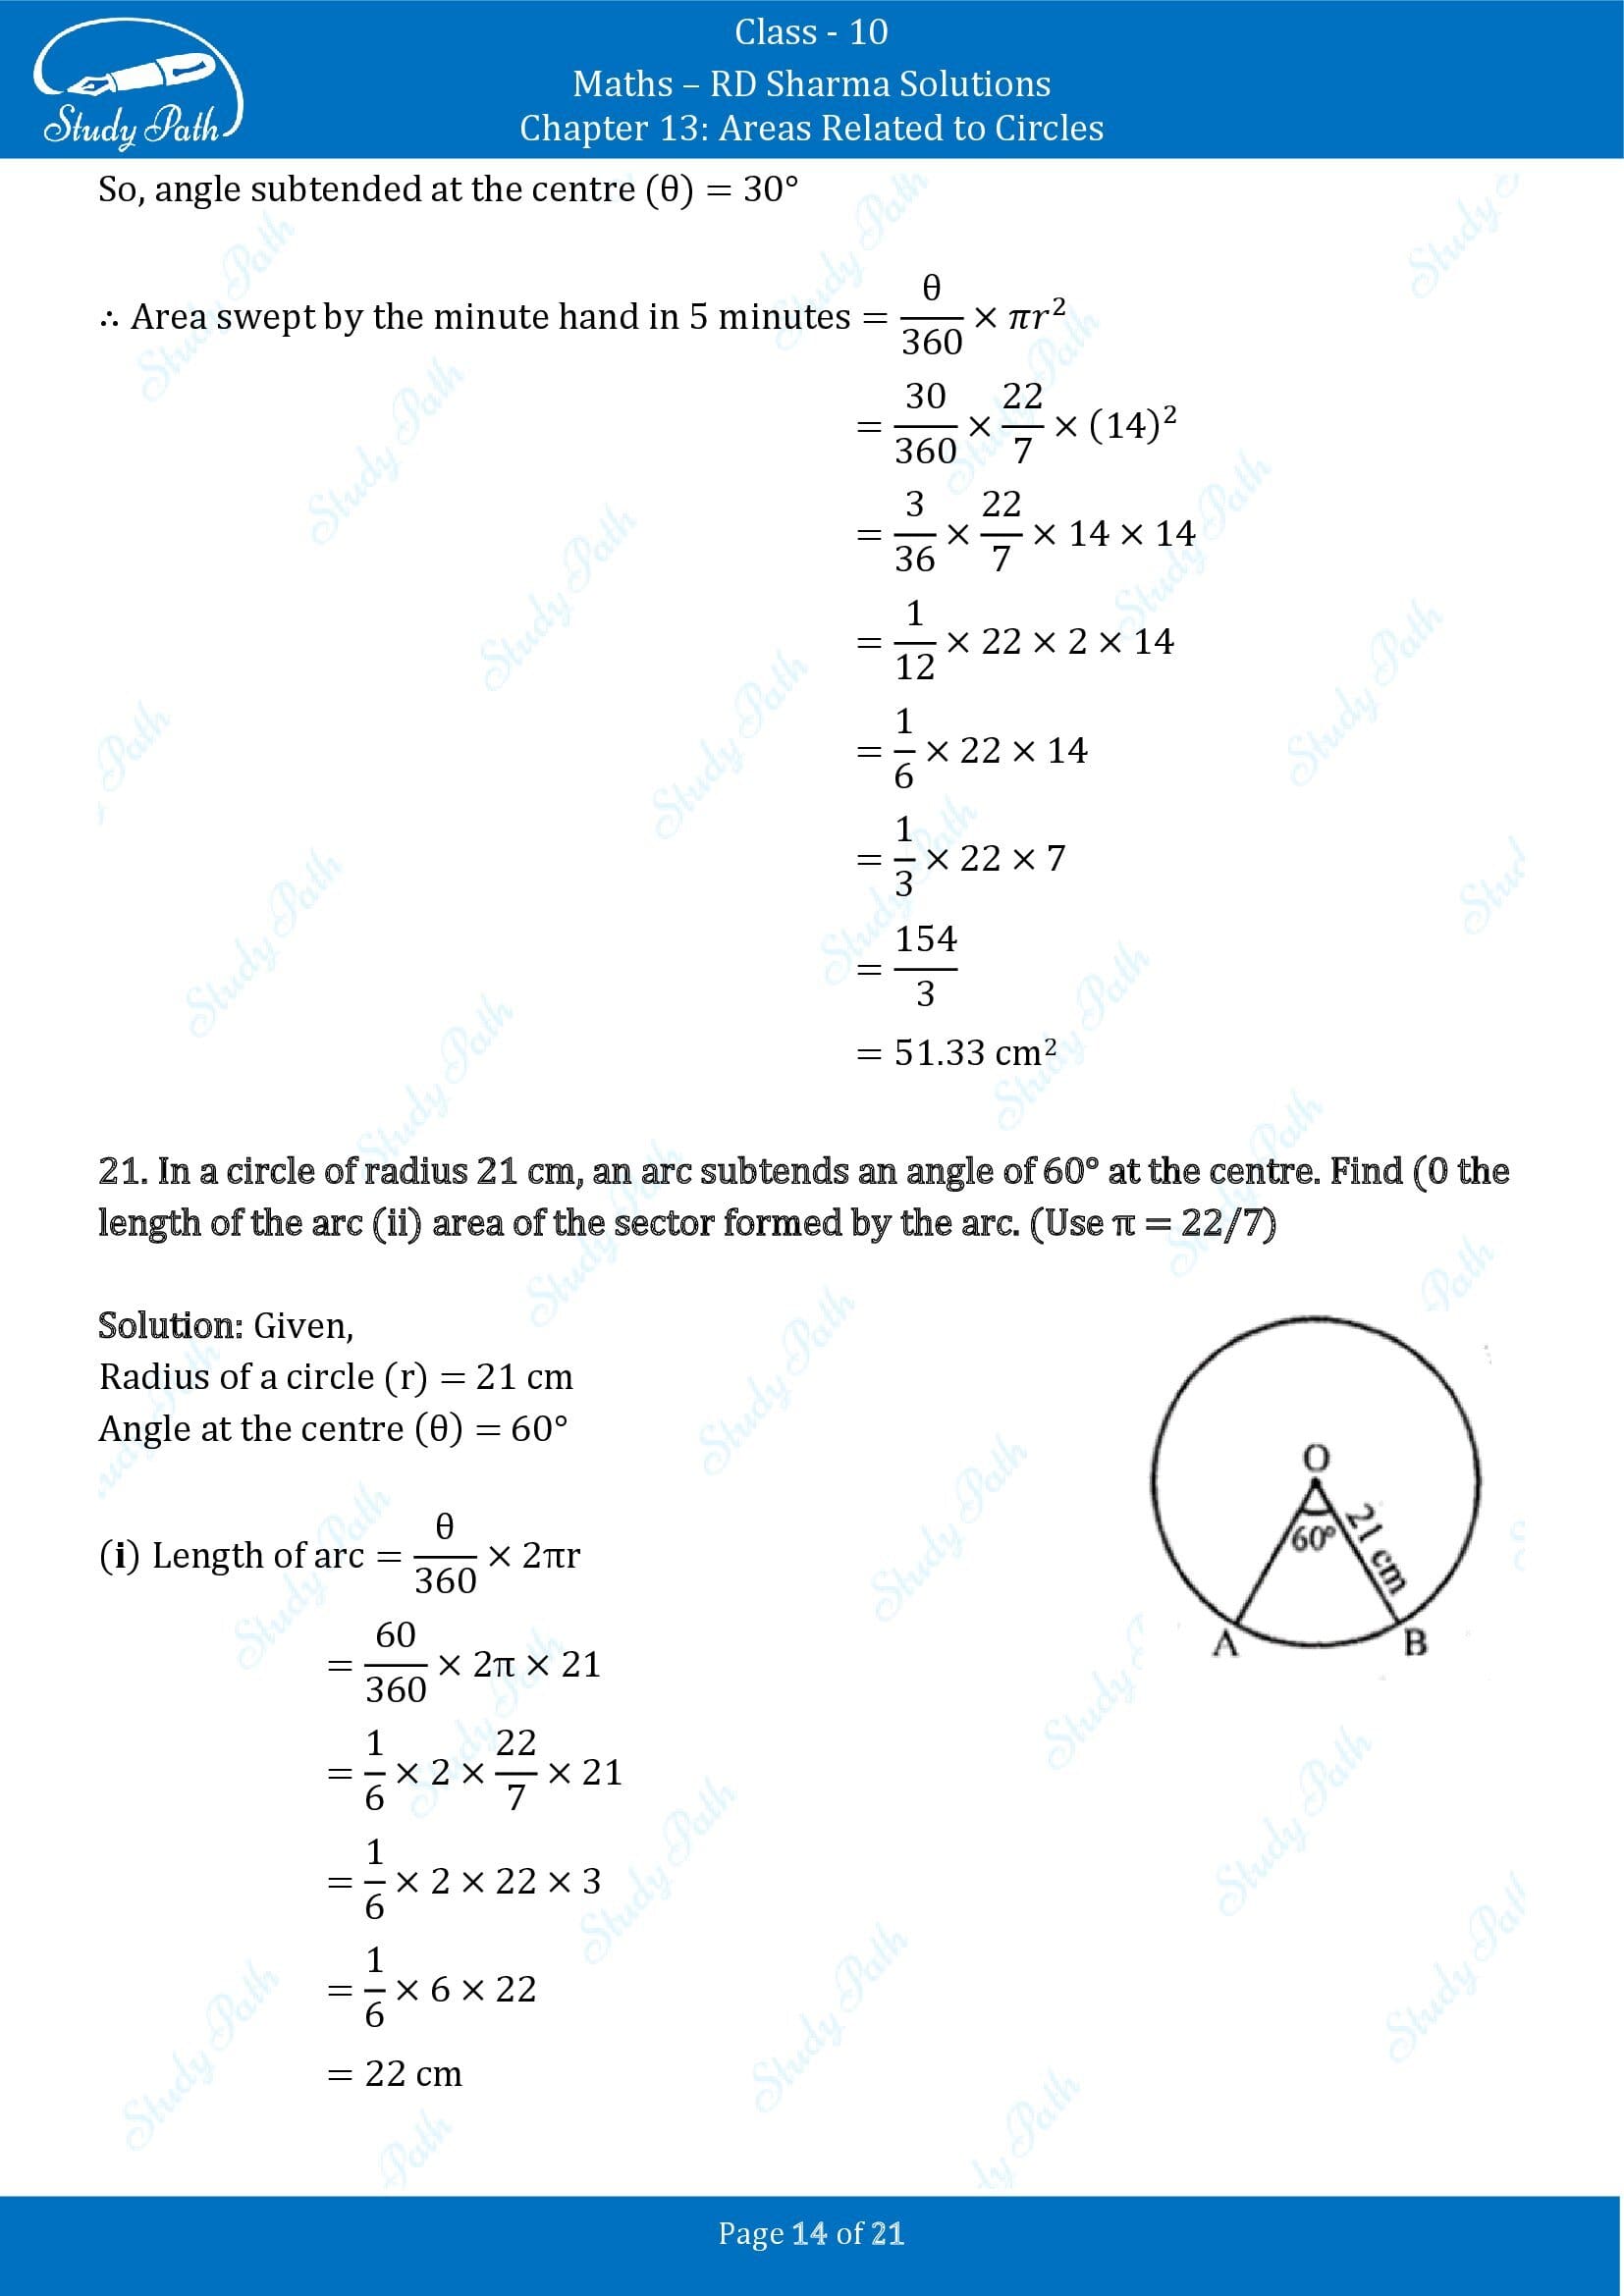 RD Sharma Solutions Class 10 Chapter 13 Areas Related to Circles Exercise 13.2 00014